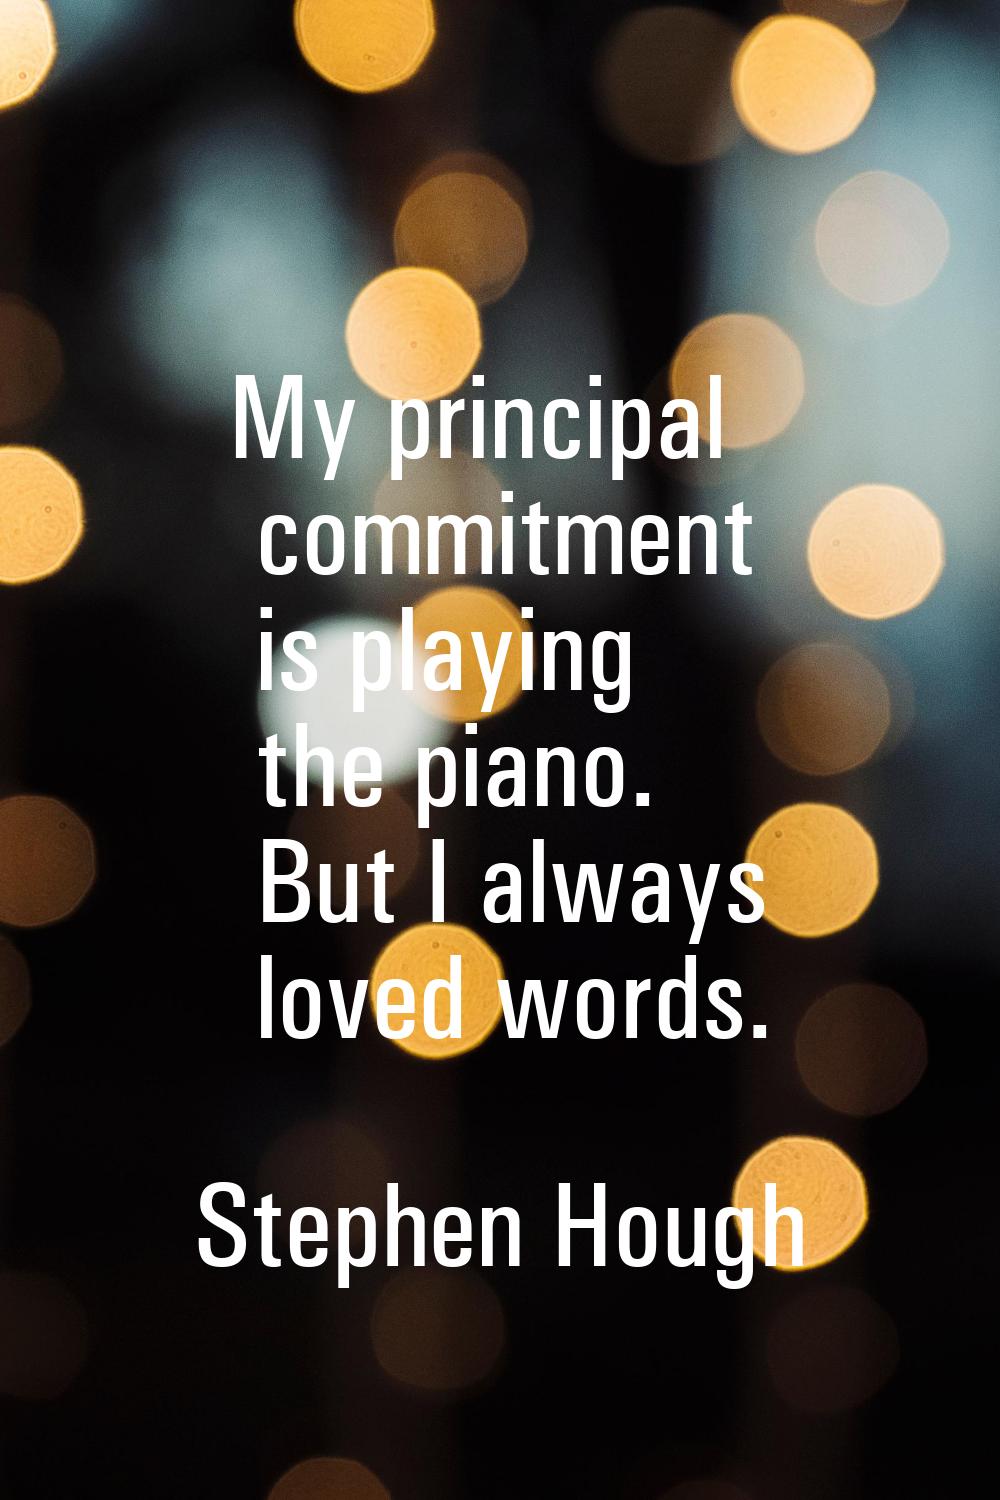 My principal commitment is playing the piano. But I always loved words.